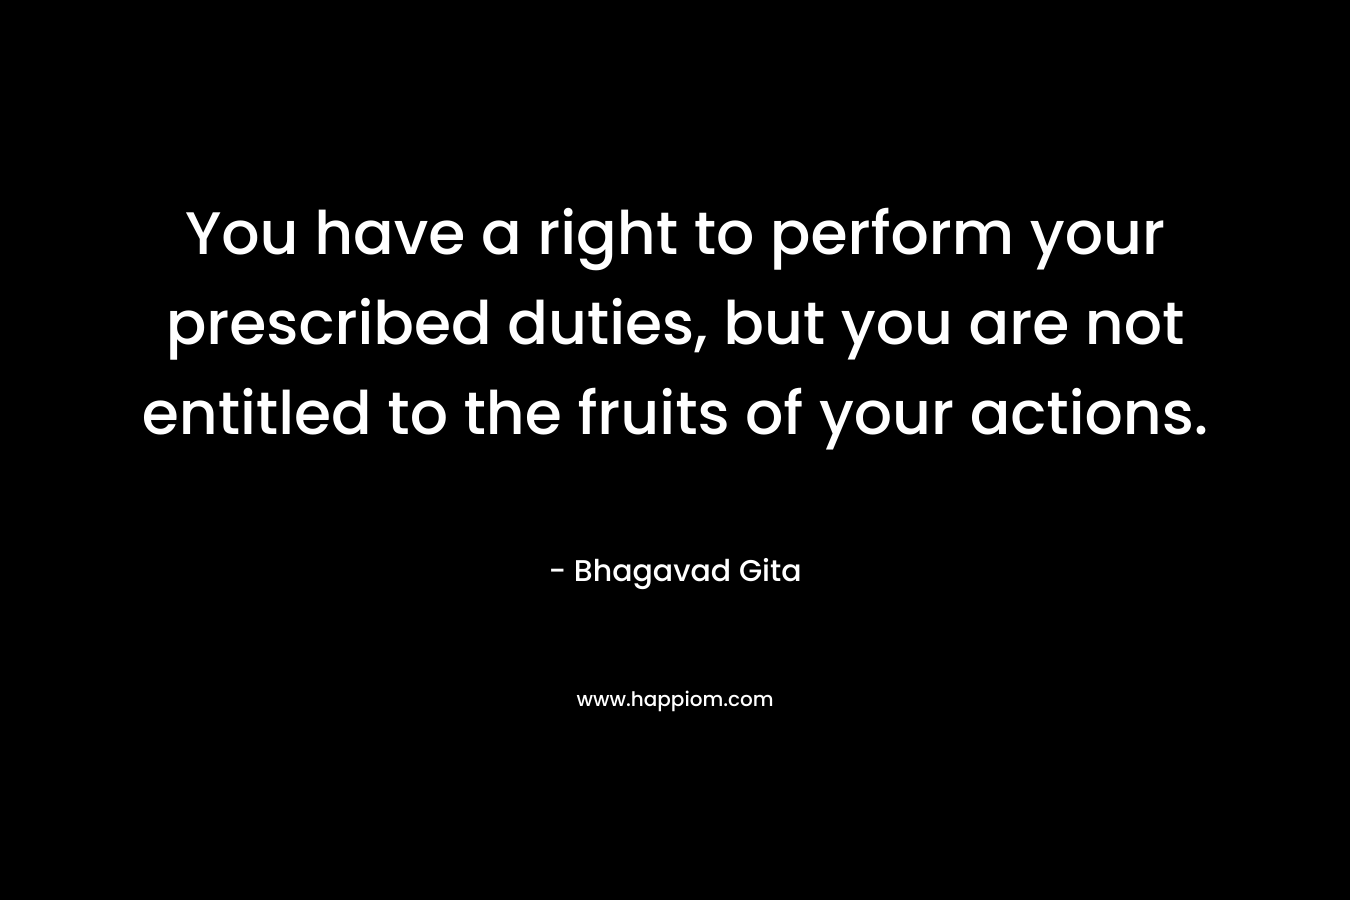 You have a right to perform your prescribed duties, but you are not entitled to the fruits of your actions. – Bhagavad Gita